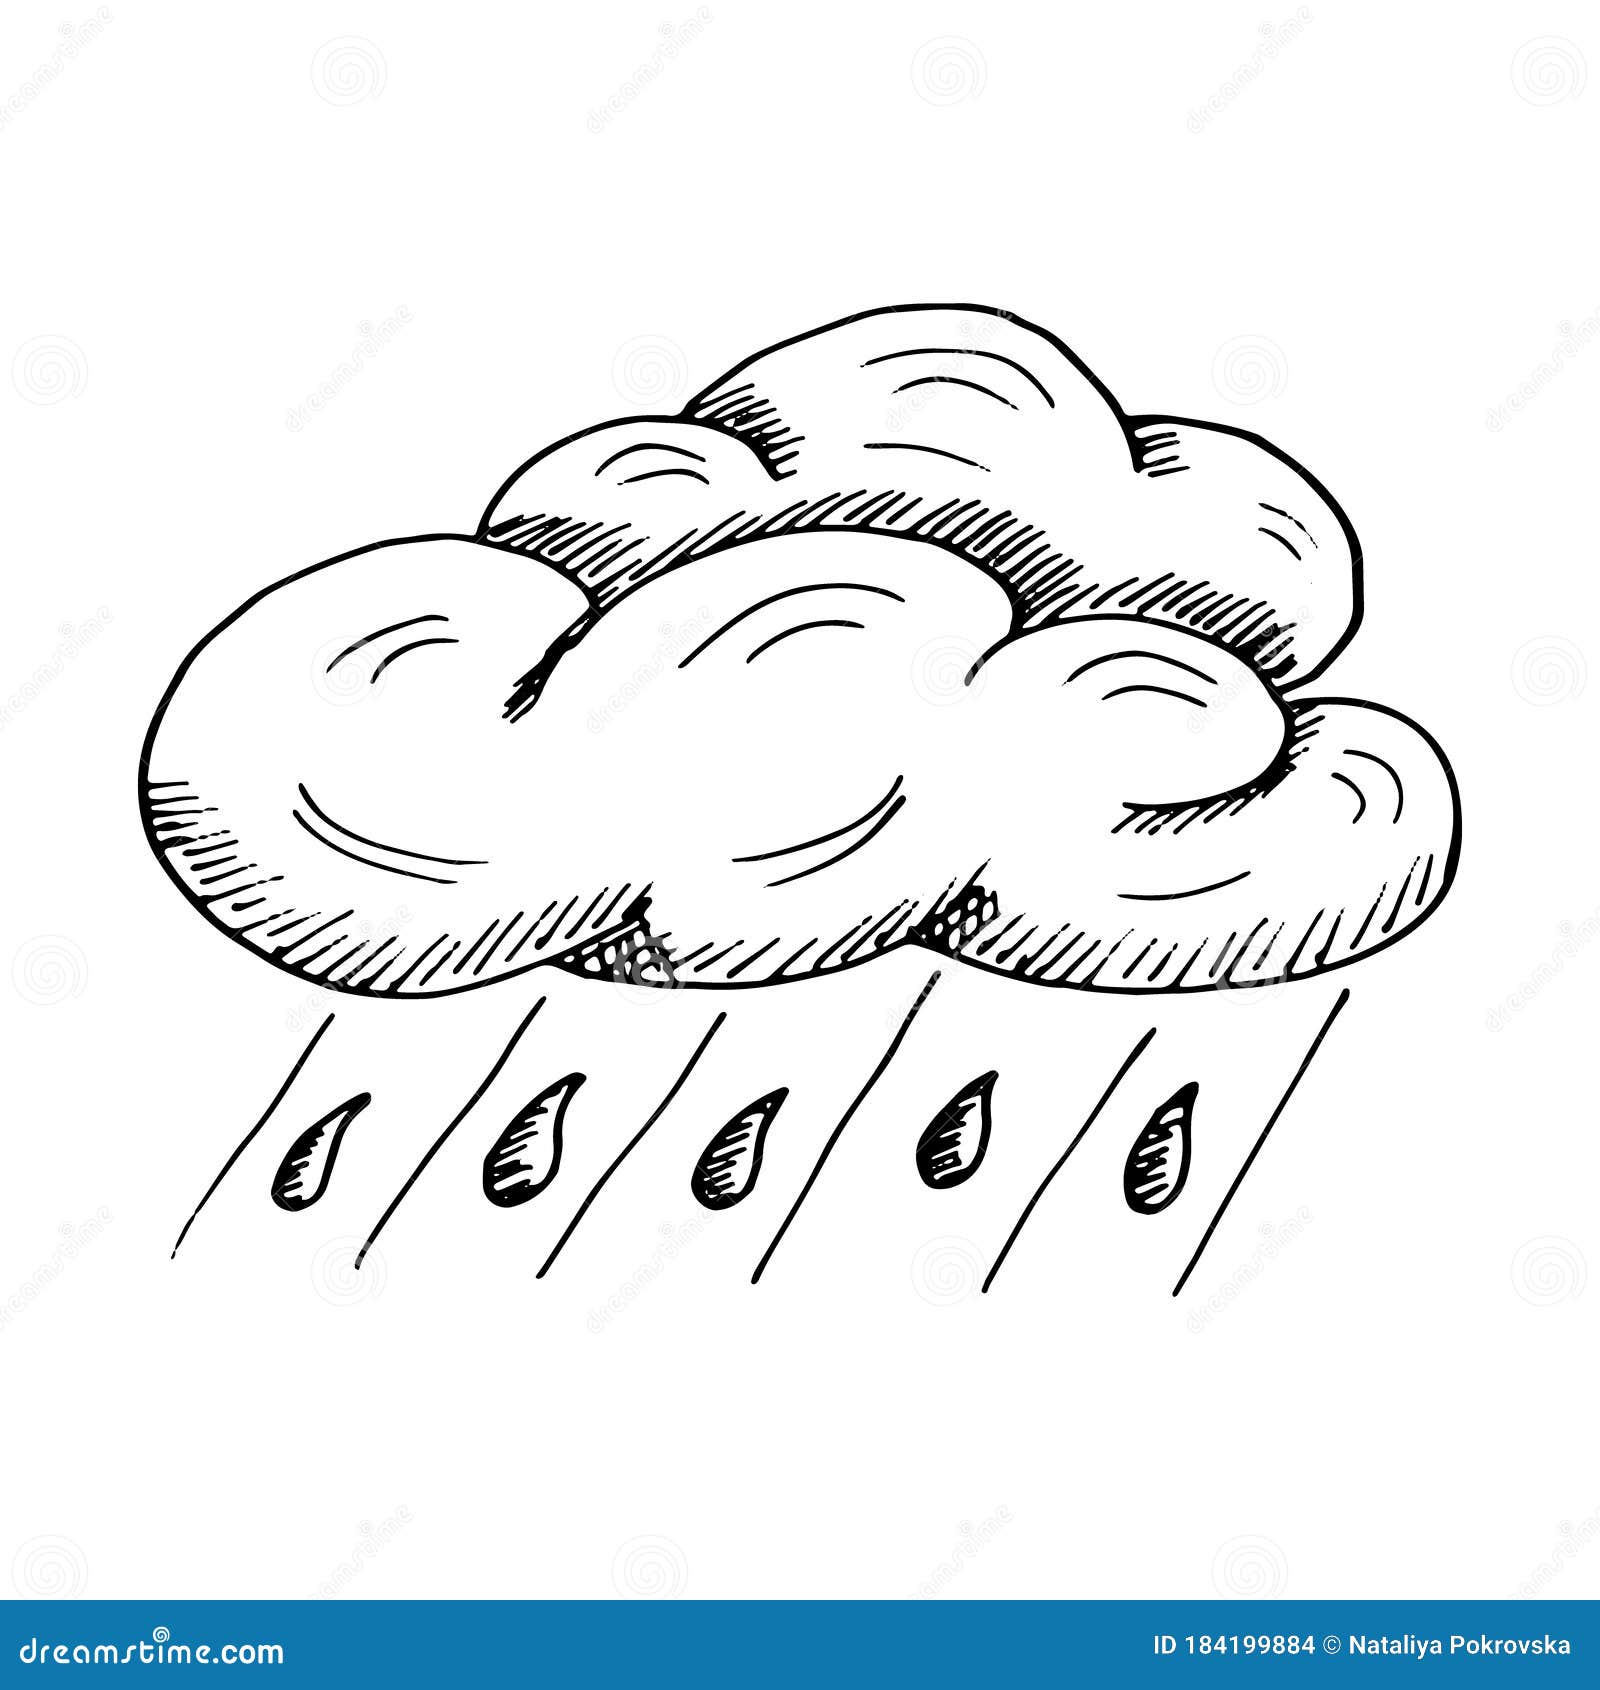 Rainy Cloud Ith Water Drops Isolated on White Backgroun. Vector Hand ...